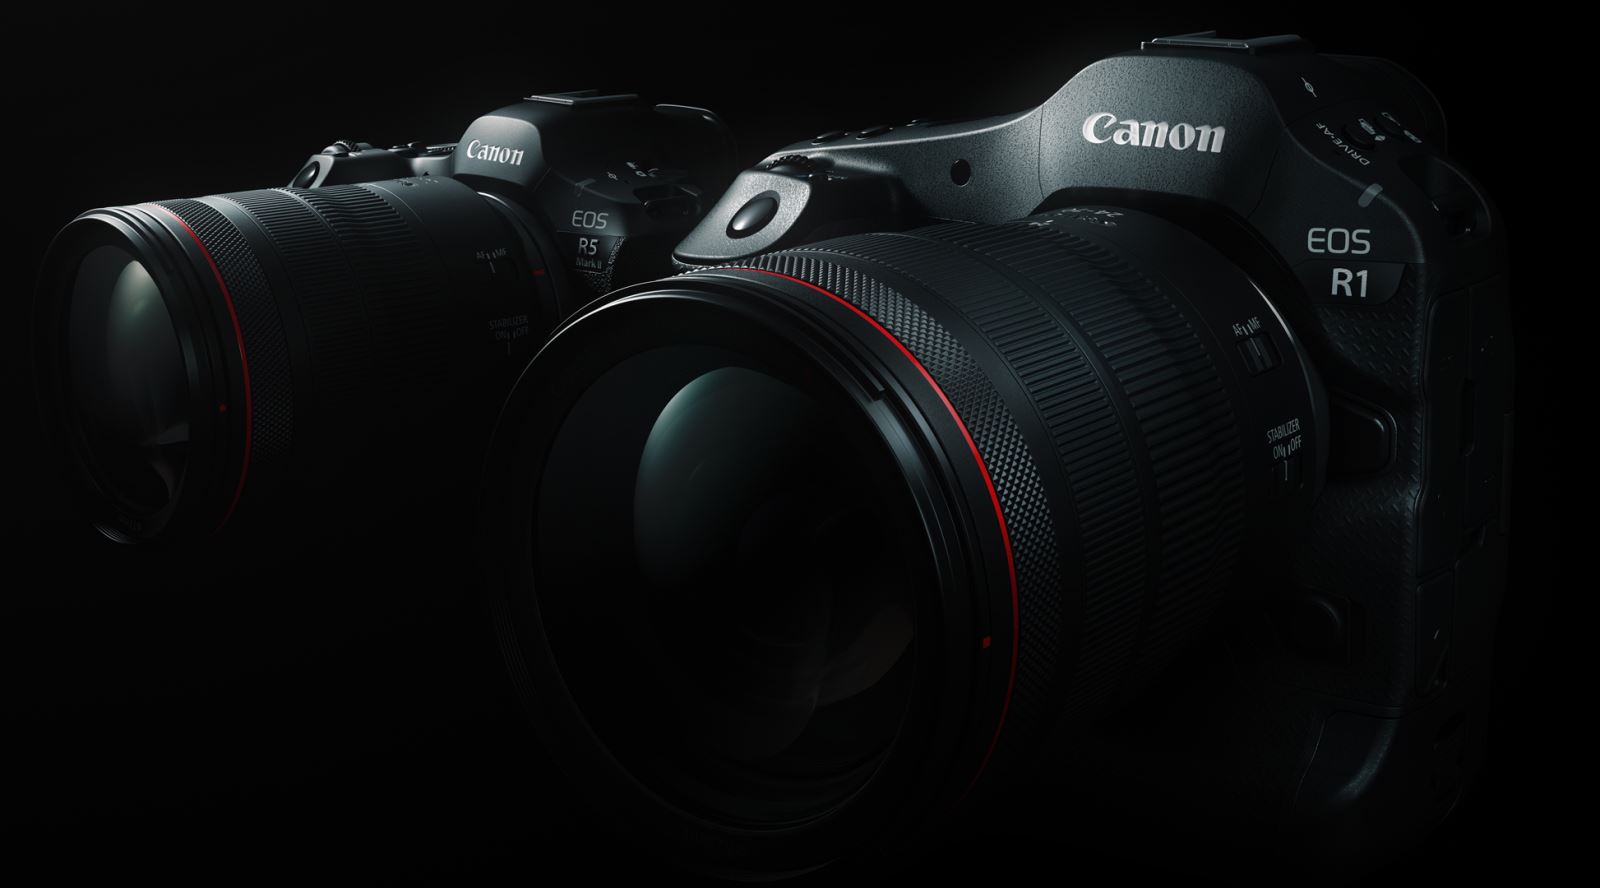 Canon launches EOS R1 and EOS R5 Mark II Mirrorless cameras